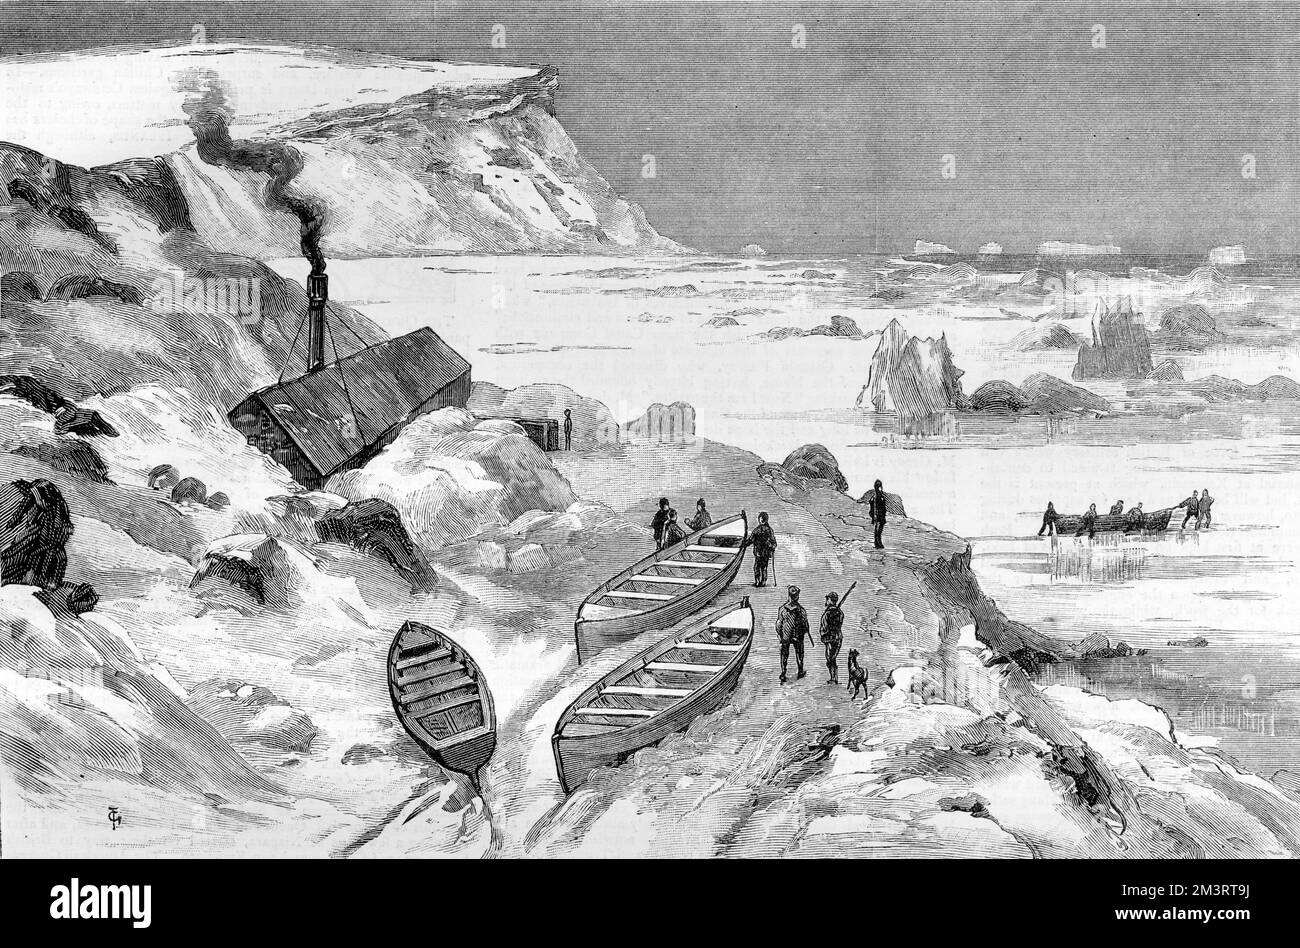 Engraving by W.L. Wyllie, featuring Benjamin Leigh Smith's fifth Arctic voyage 1881-82. Between 1871 and 1882, Leigh Smith undertook five major scientific expeditions to Svalbard and Franz Josef Land. In 1881, he and his crew survived for 10 months in Russian Franz Josef Land after their ship was crushed in the ice at Cape Flora, Northbrook Island. This plate shows The Explorer's Encampment.  1882 Stock Photo